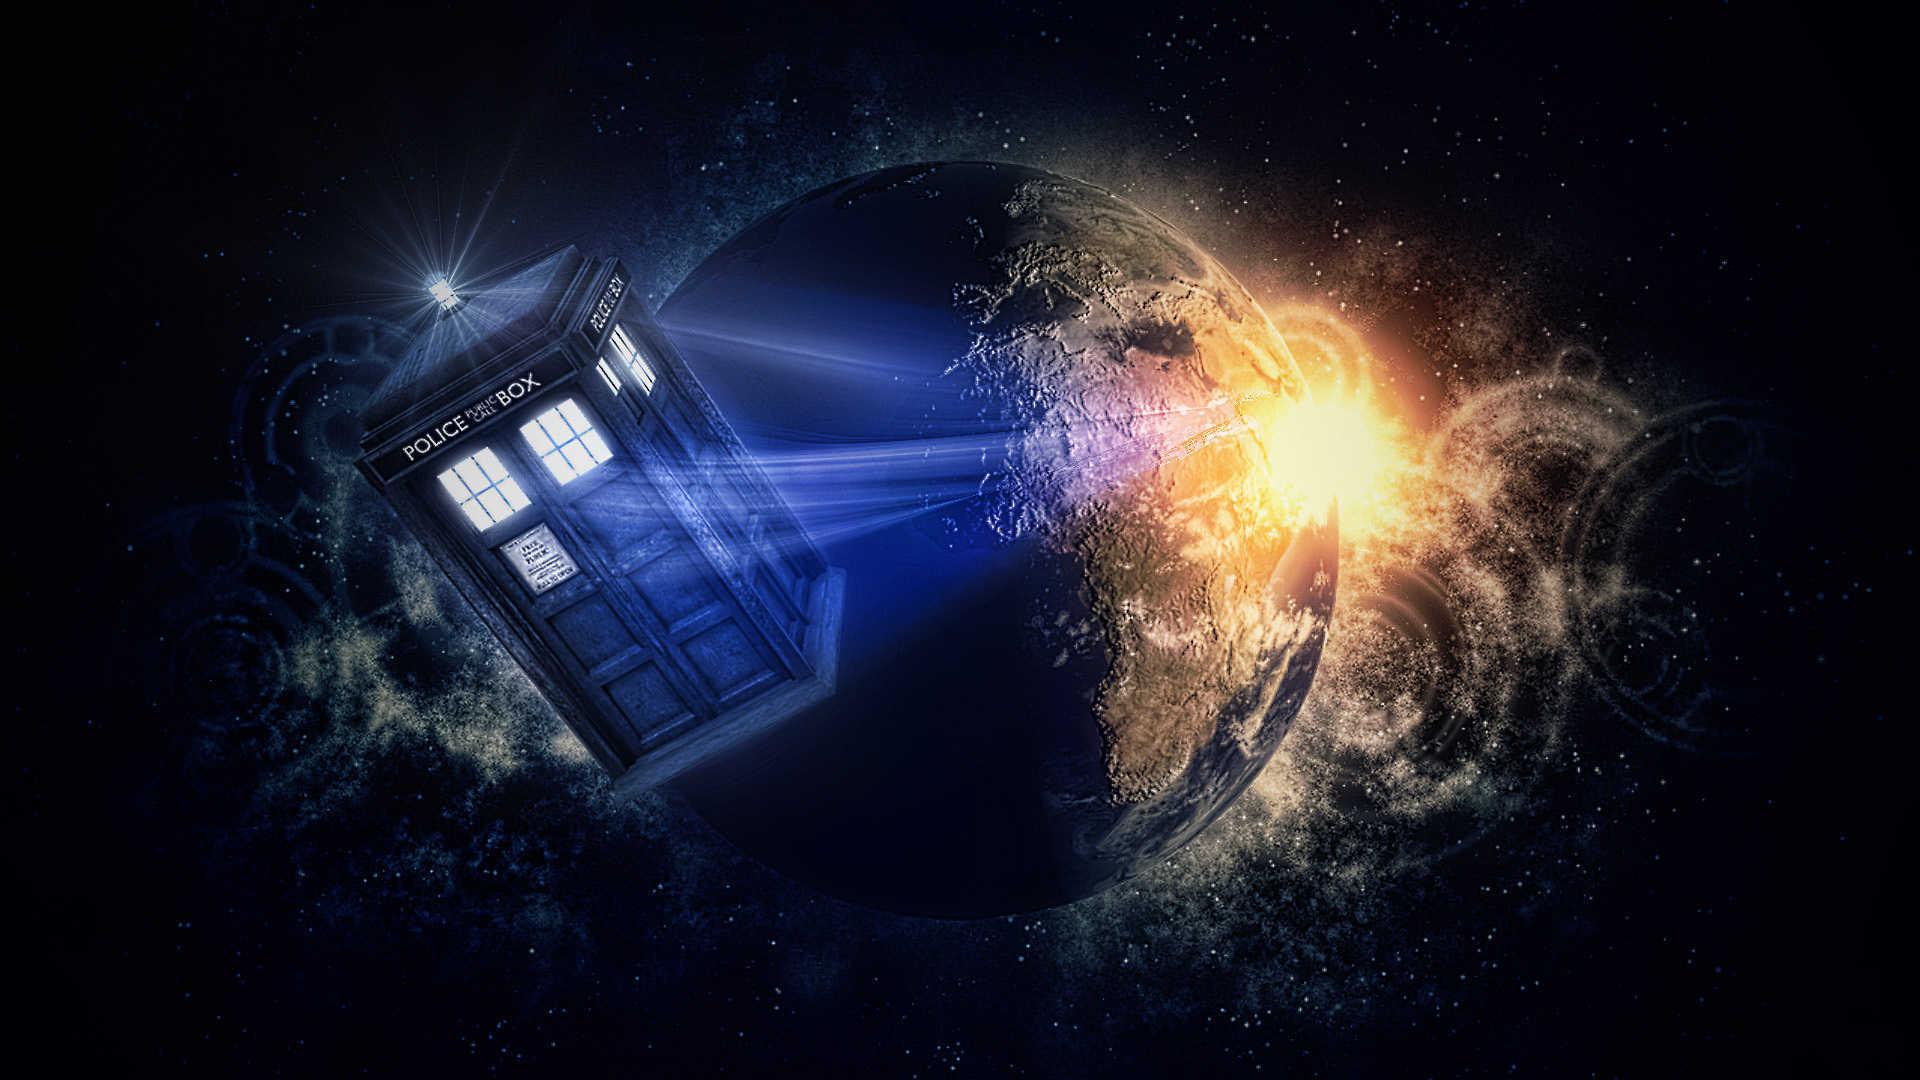 Doctor Who Wallpaper 1080p